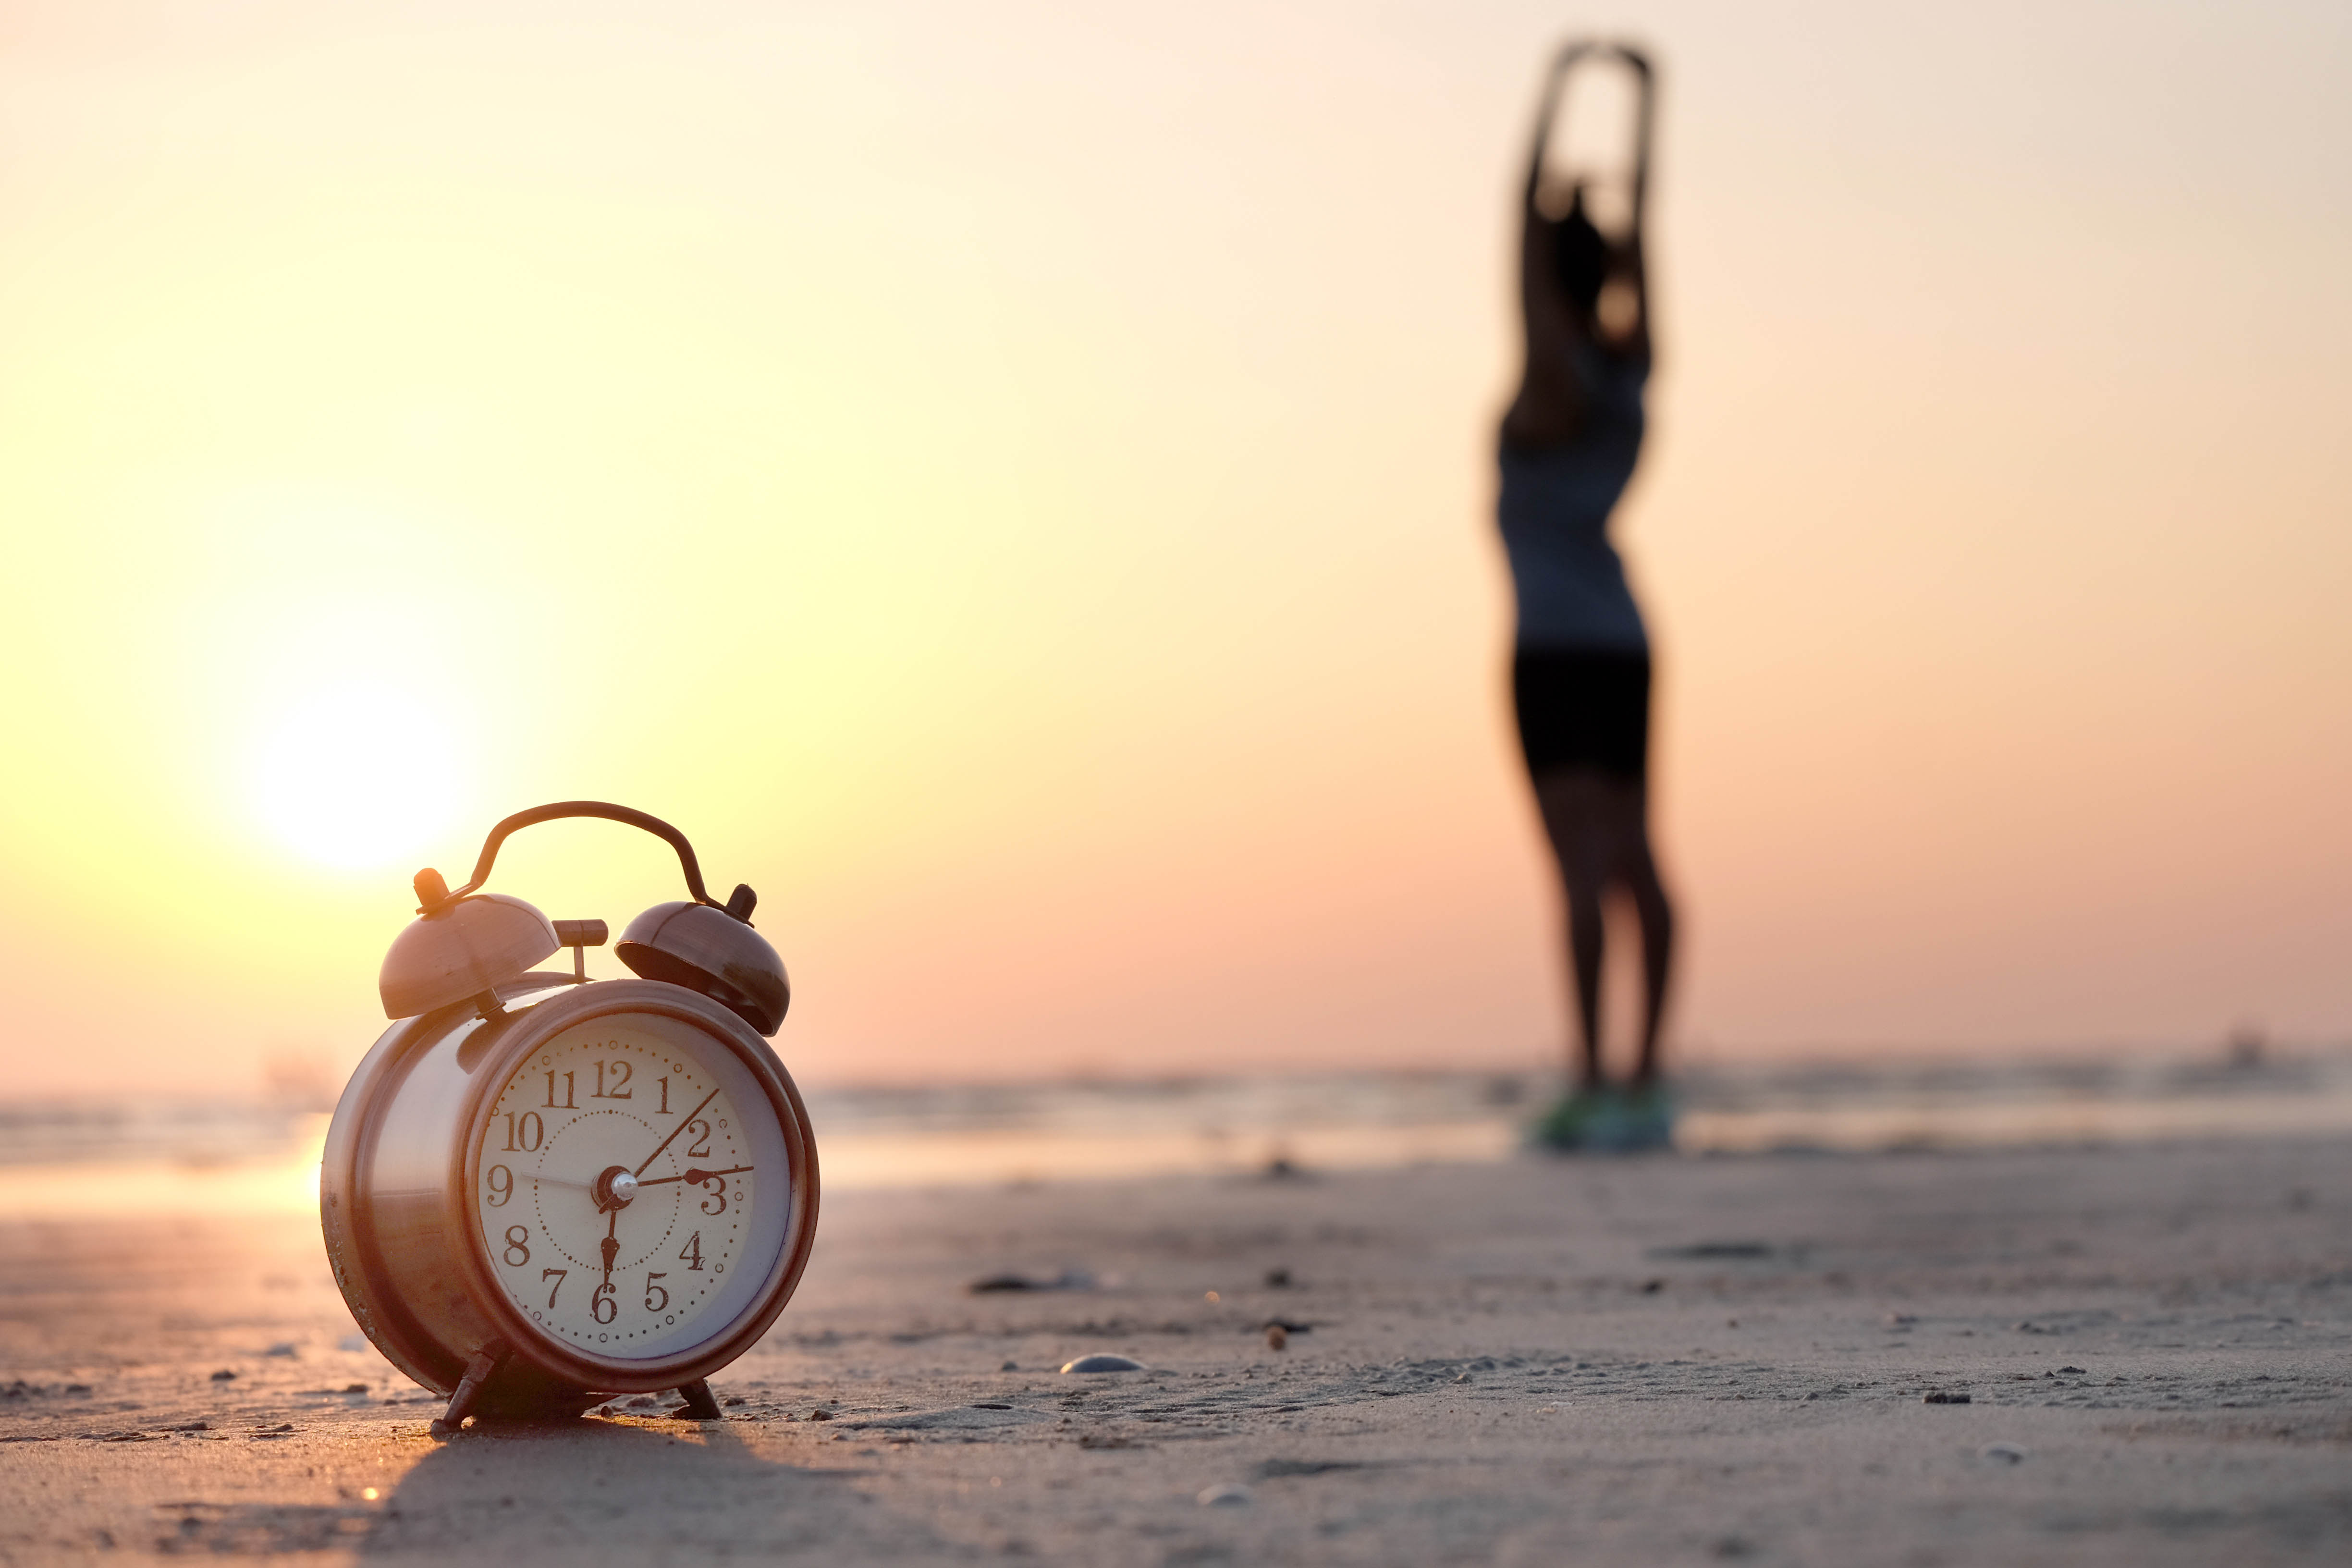 Woman stretching on the beach facing the sunrise, clock in the foreground showing that it is 6:15am